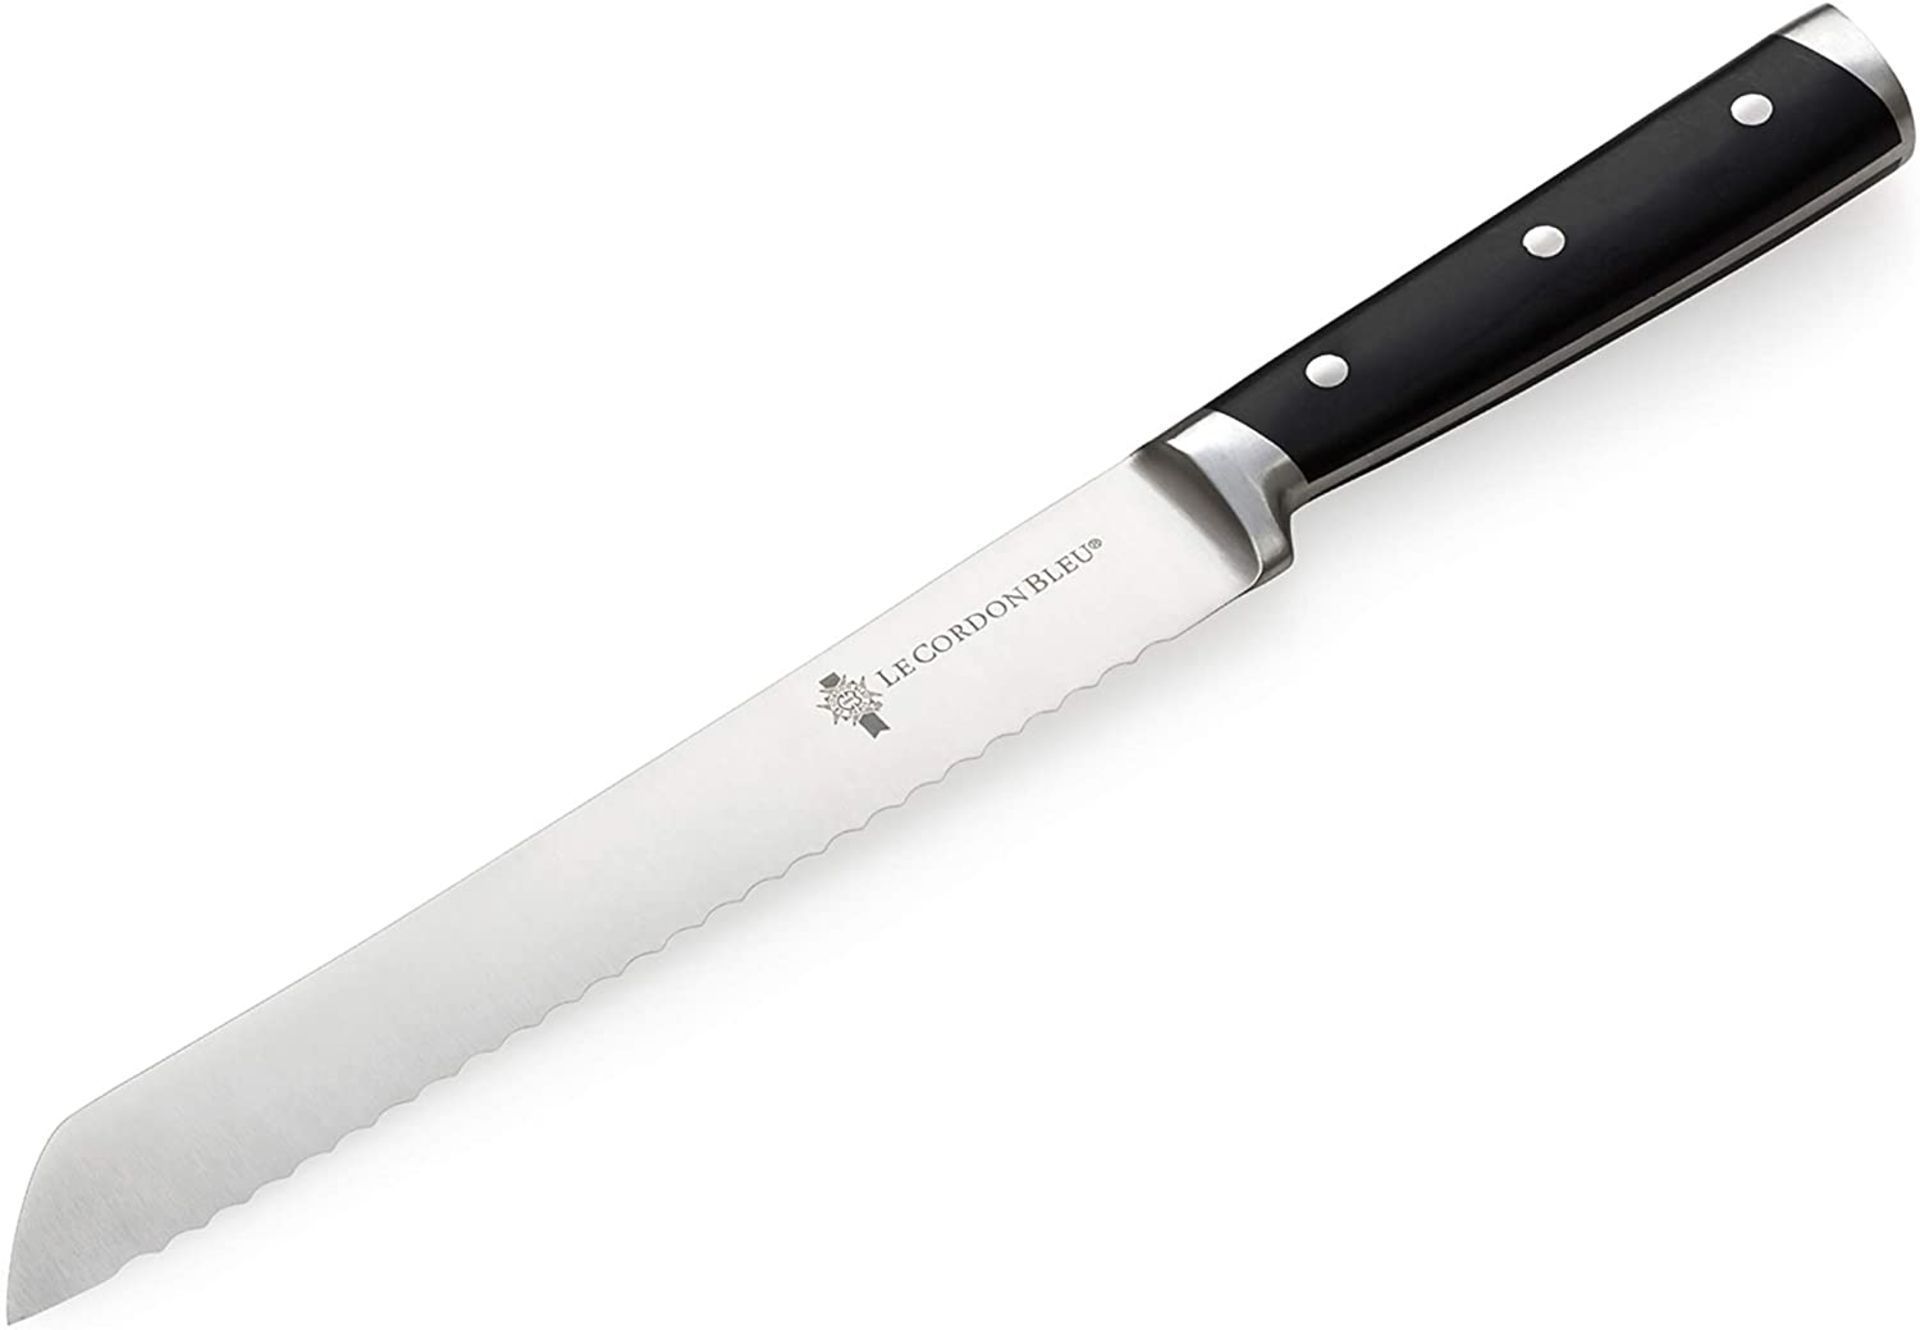 BRAND NEW LE CORDON BLEU STAINLESS STEEL BREAD KNIFE, 200 MM, BLACK - RRP £15. - Image 2 of 2